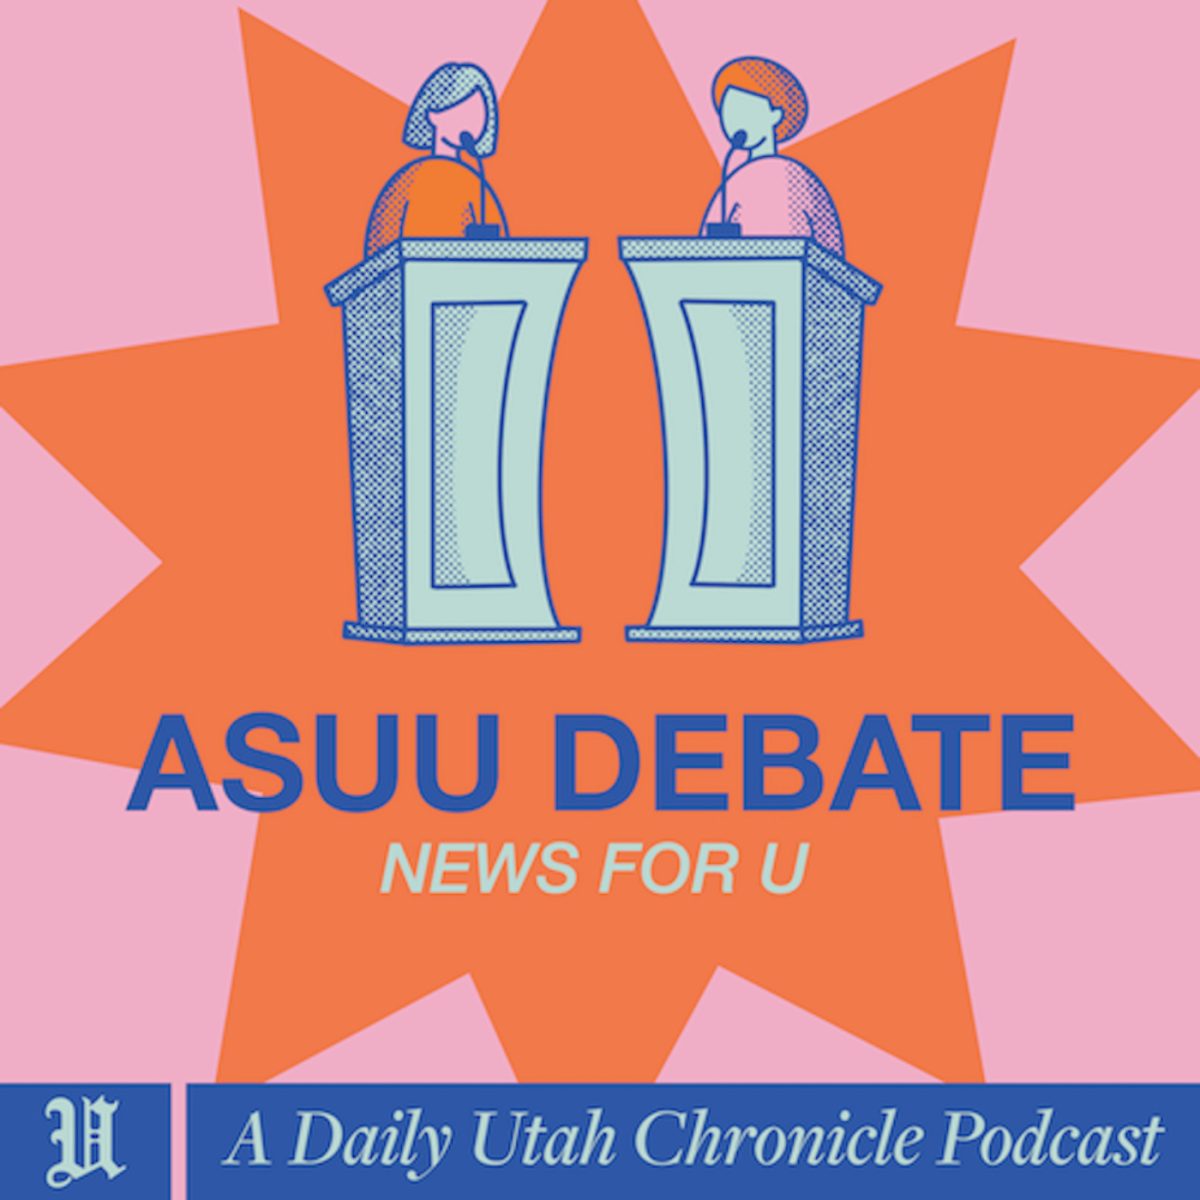 (Design by Sydney Stam | The Daily Utah Chronicle)